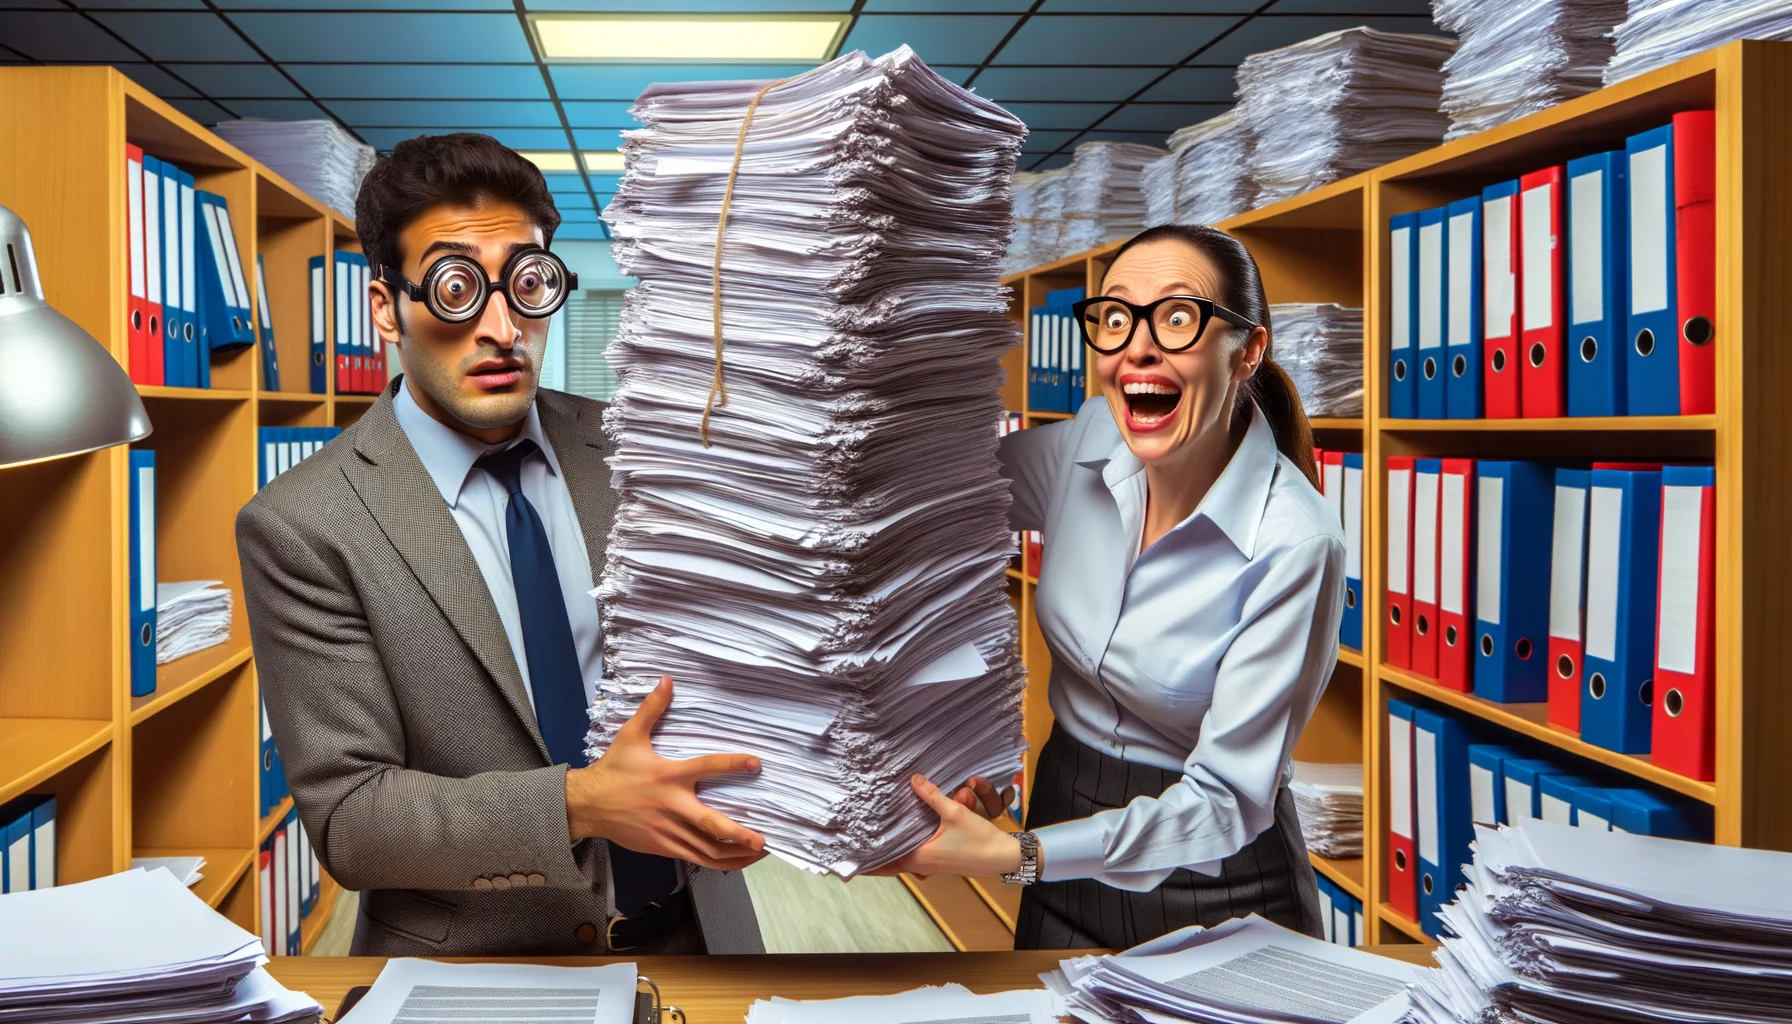 Create a humorously exaggerated scene showing a hardworking but somewhat confused individual of Hispanic descent receiving a voluminous stack of paperwork related to house building grants. The setting is a brightly lit, cluttered office space with stacks of binders and papers everywhere. The man, visibly shocked by the panoply of information, holds the paperwork precariously in his hands, while a chipper Caucasian female civil servant in a formal suit and quirky glasses is humorously enthusiastic about explaining each complex paperwork detail, pointing at the documents with a big grin on her face.